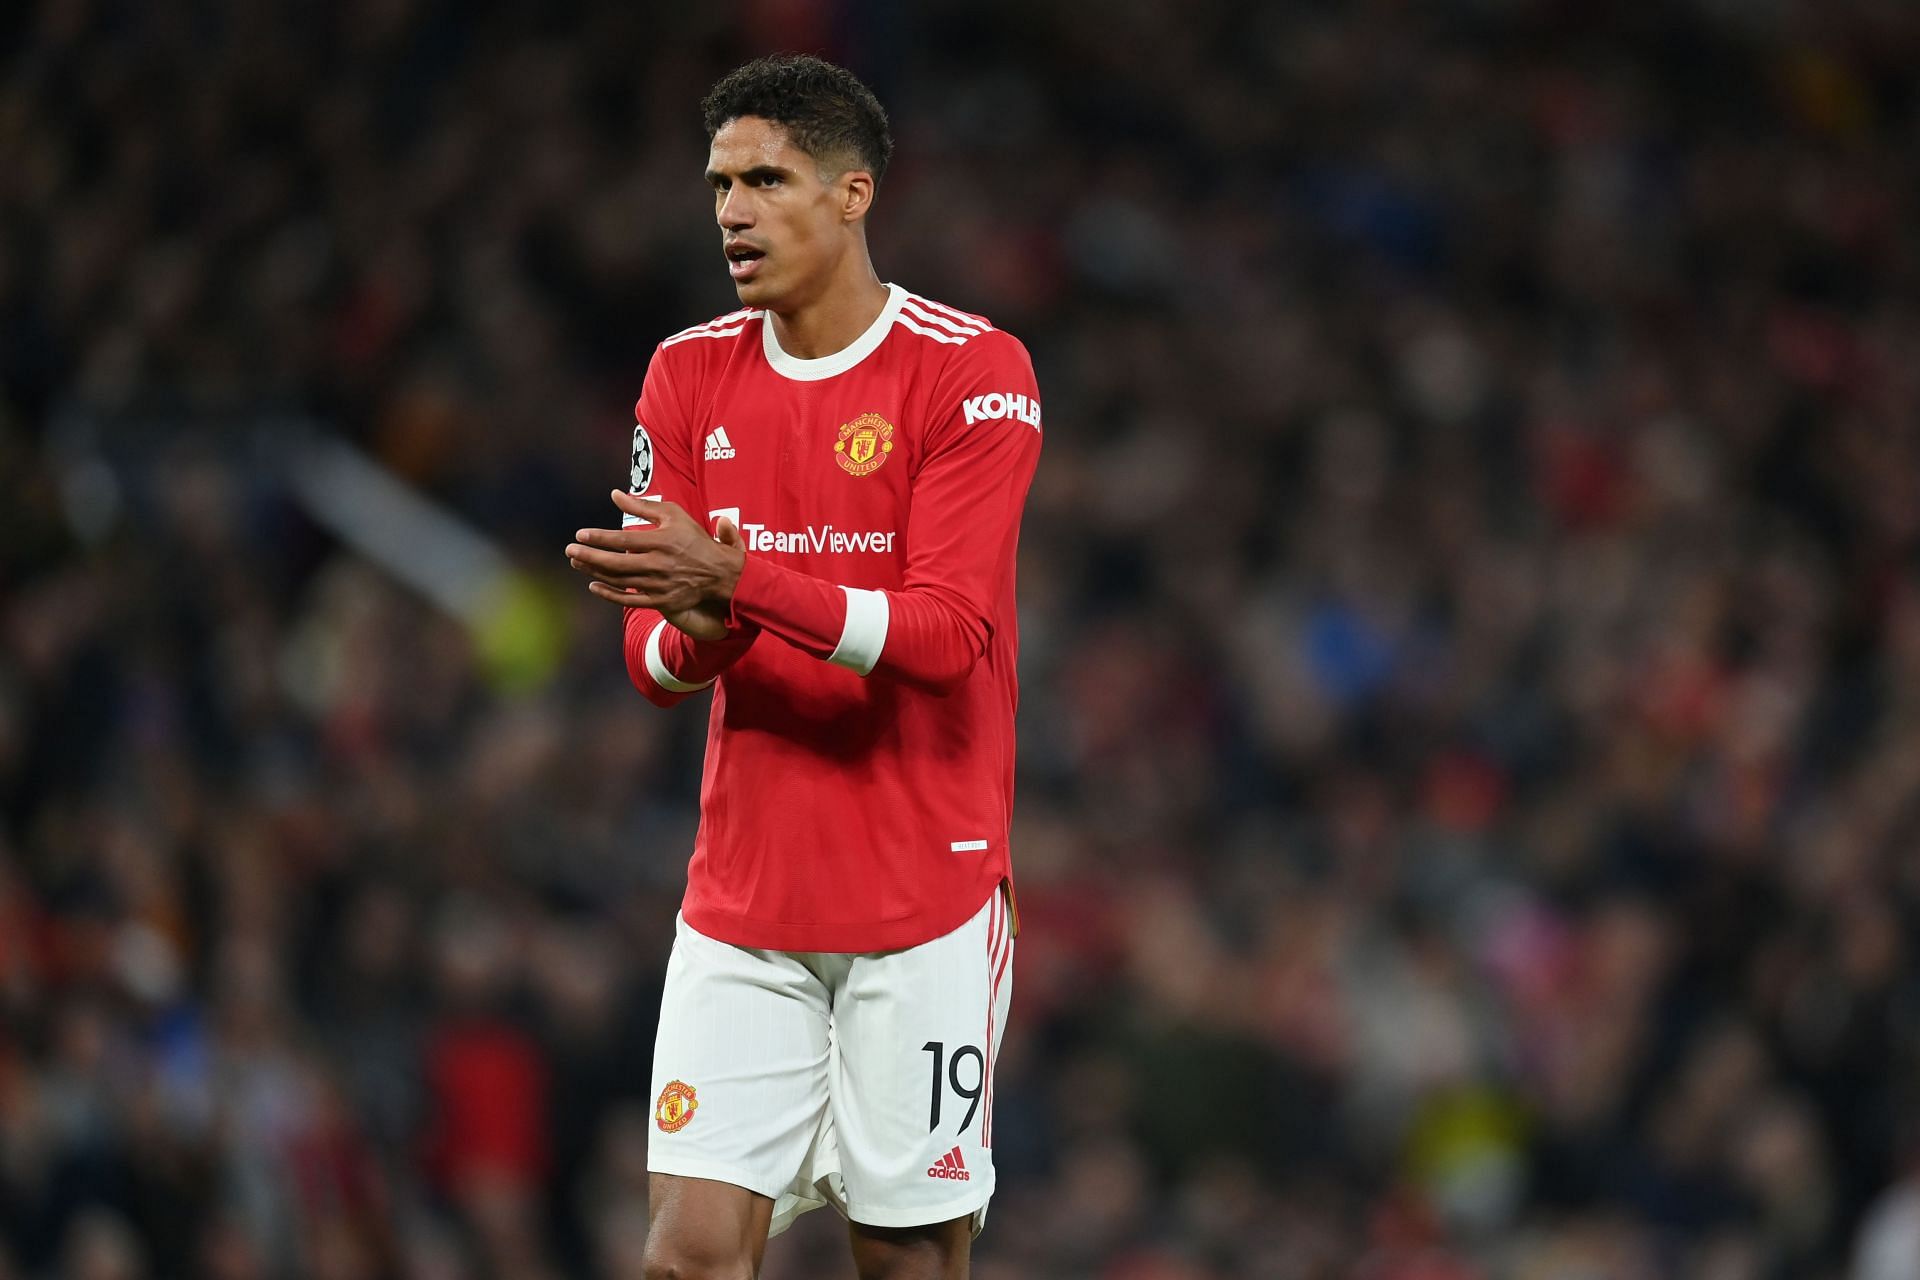 Raphael Varane has blown hot and cold for Manchester United so far.